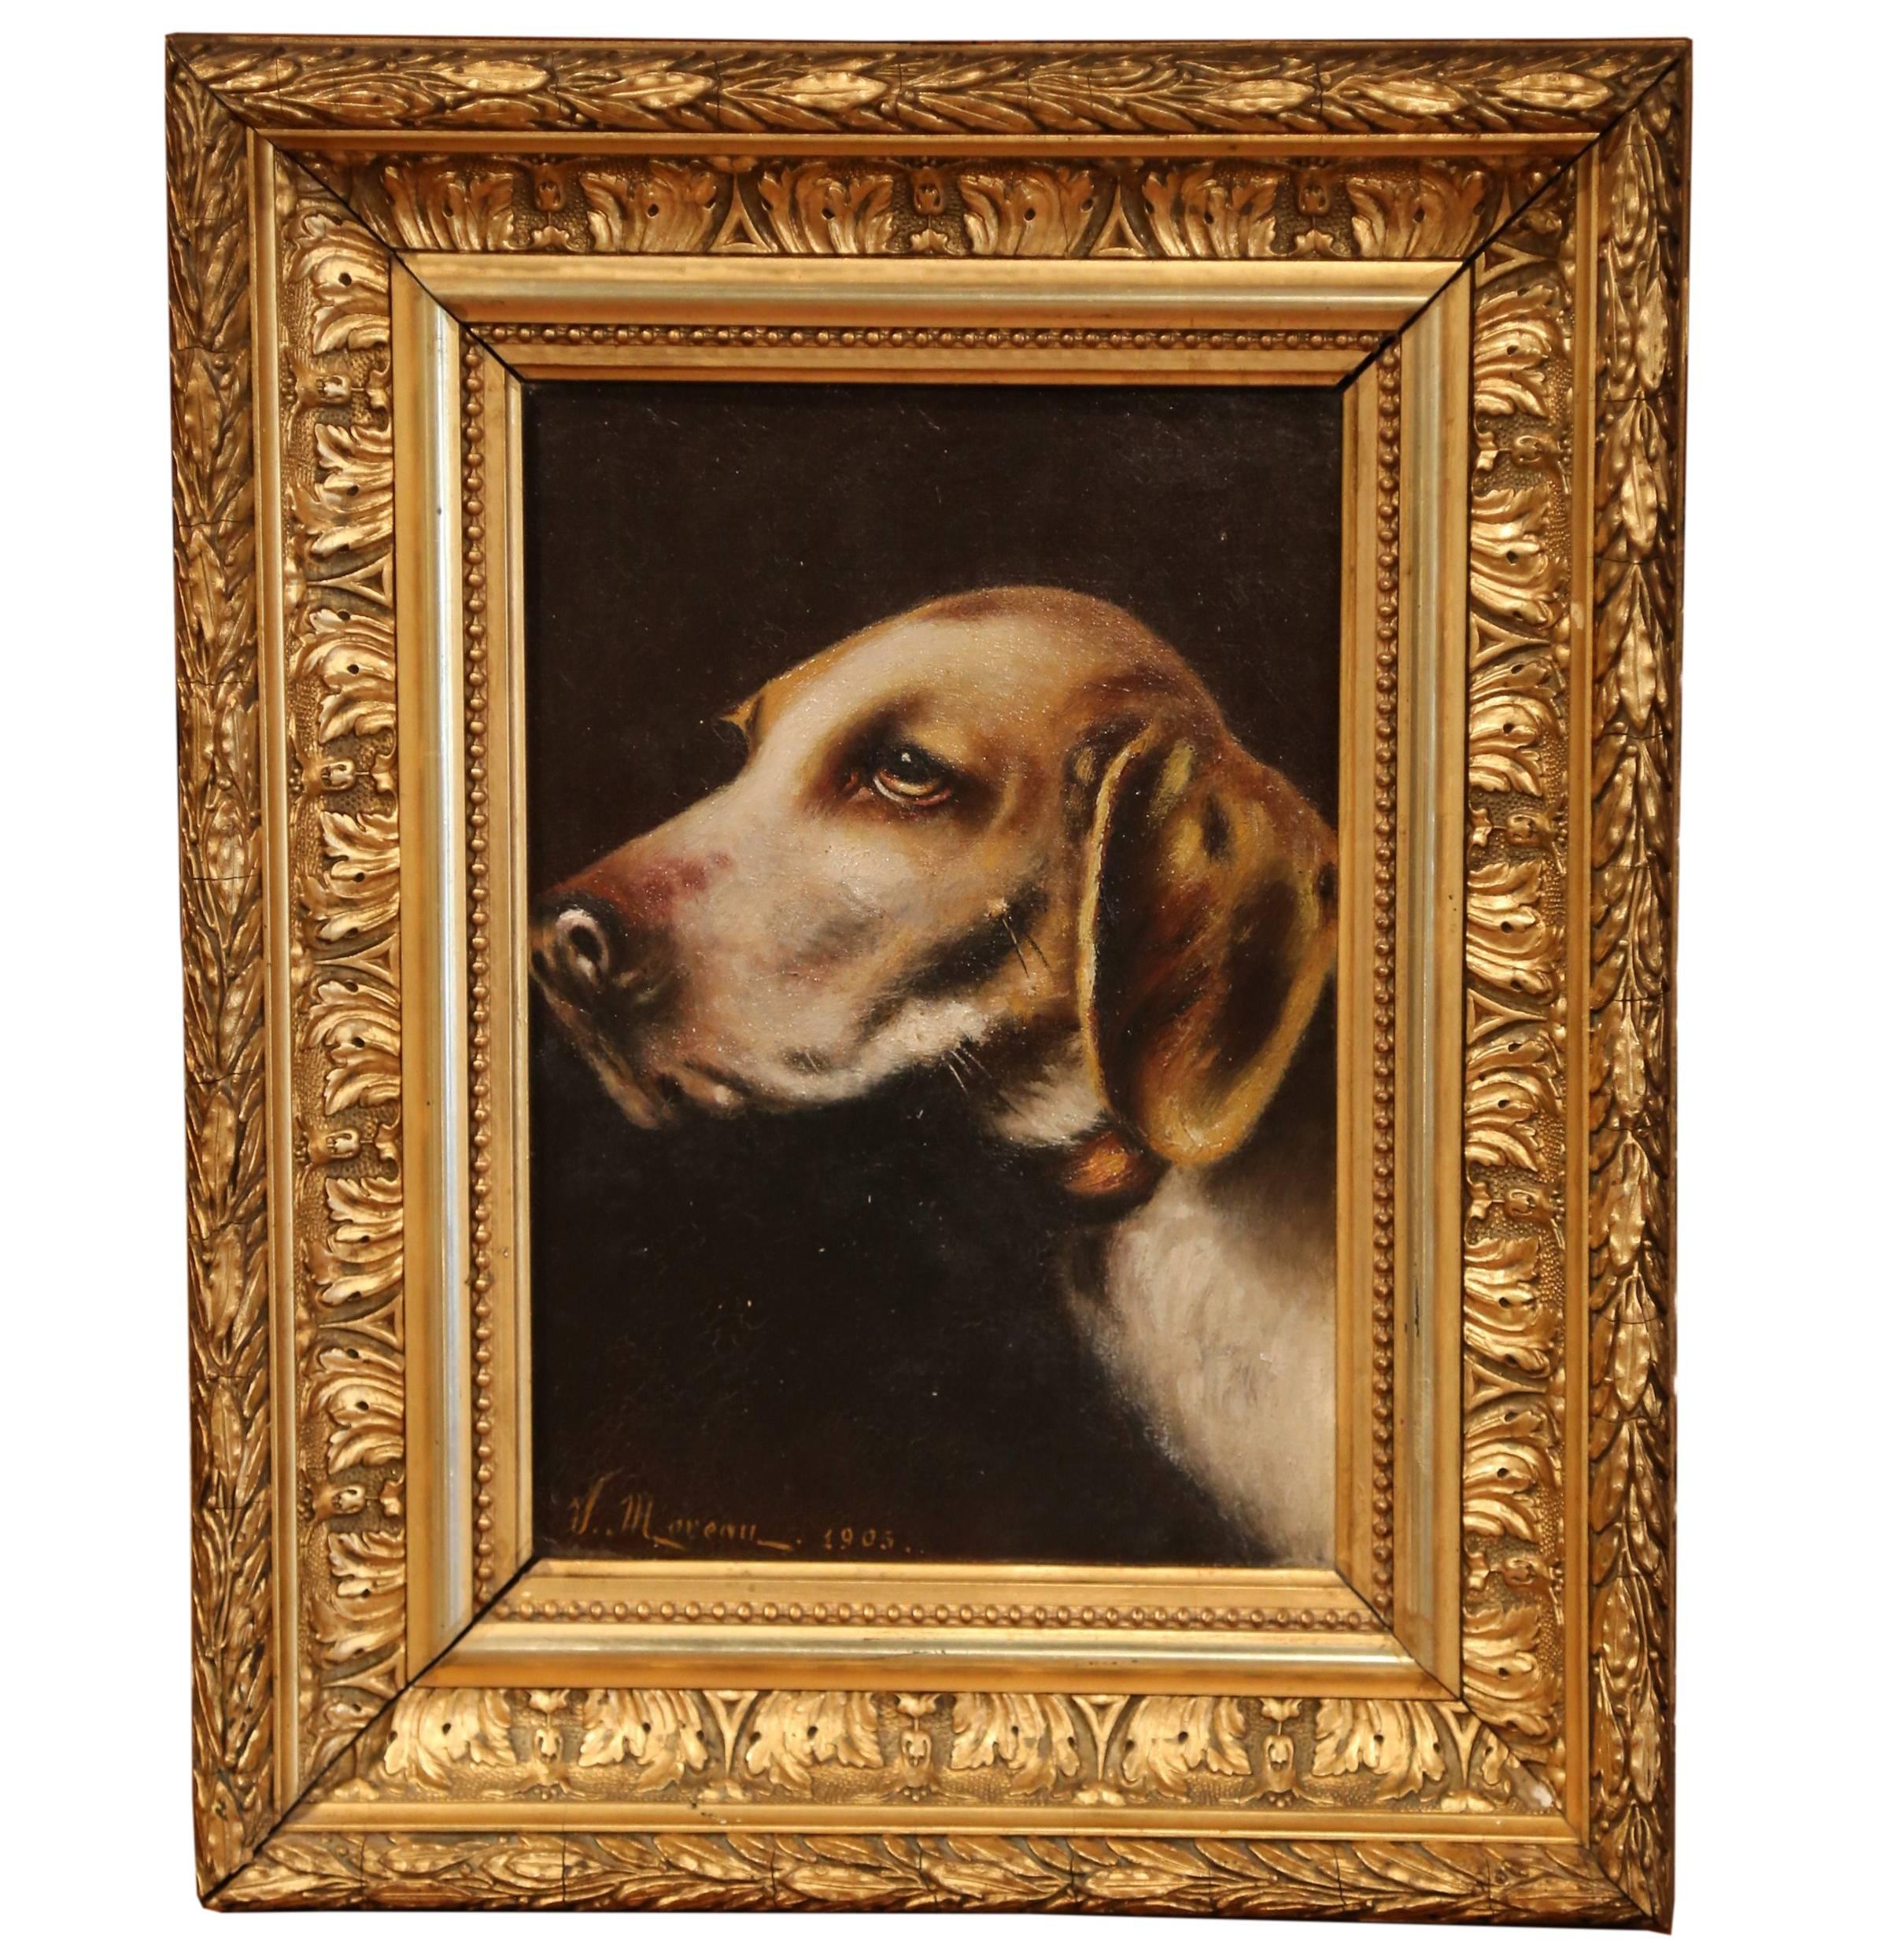 Unknown Animal Painting - Early 20th Century Framed Dog Painting in Gilt Frame Signed V. Moreau Dated 1905